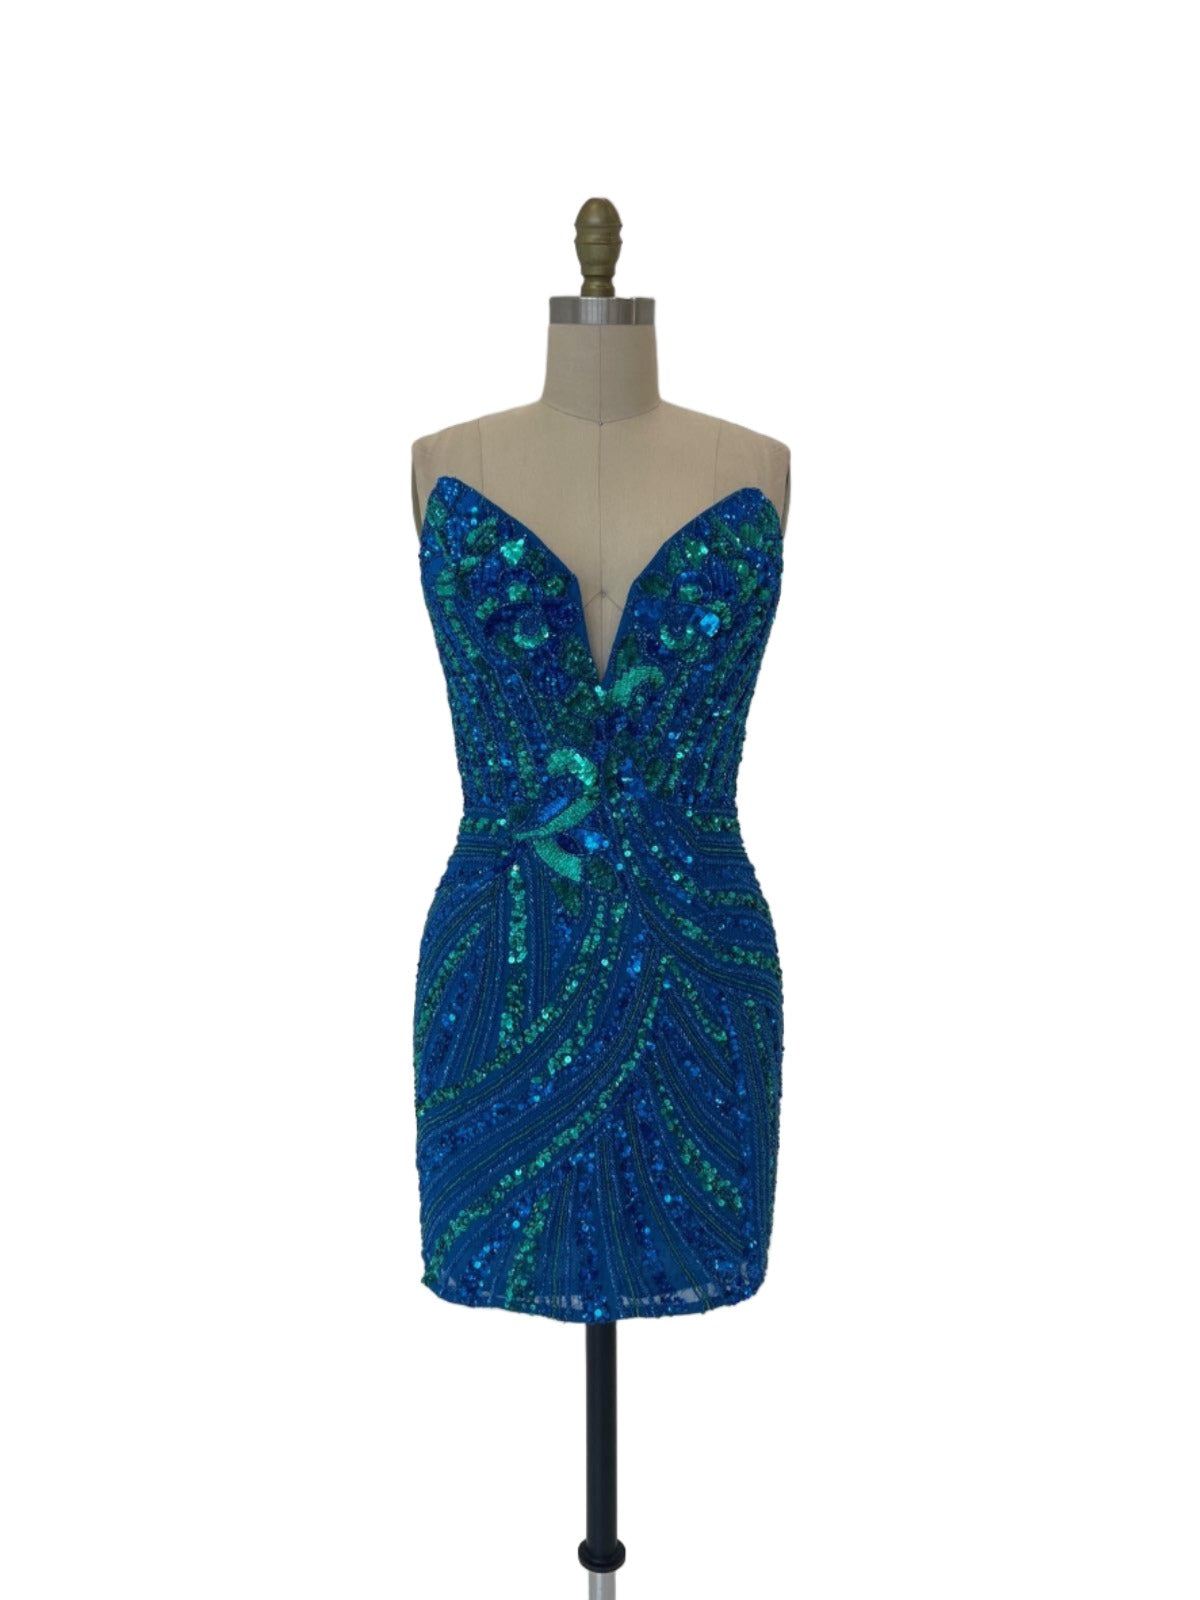 Ashley Lauren 4500 This knockout Short cocktail dress features a plunging V neckline and back and is made of sequins.&nbsp; It has a beautiful multi colored sequin pattern that makes this dress stand out.&nbsp;&nbsp;  Available colors: Turquoise/Royal, Black, Blue/Jade, Bright Pink, Candy Pink, Emerald, Gold, Gold/Black, Ivory, Lilac, Rose Gold, Sky, Sky/Nude&nbsp;  Available sizes:&nbsp; 00-16